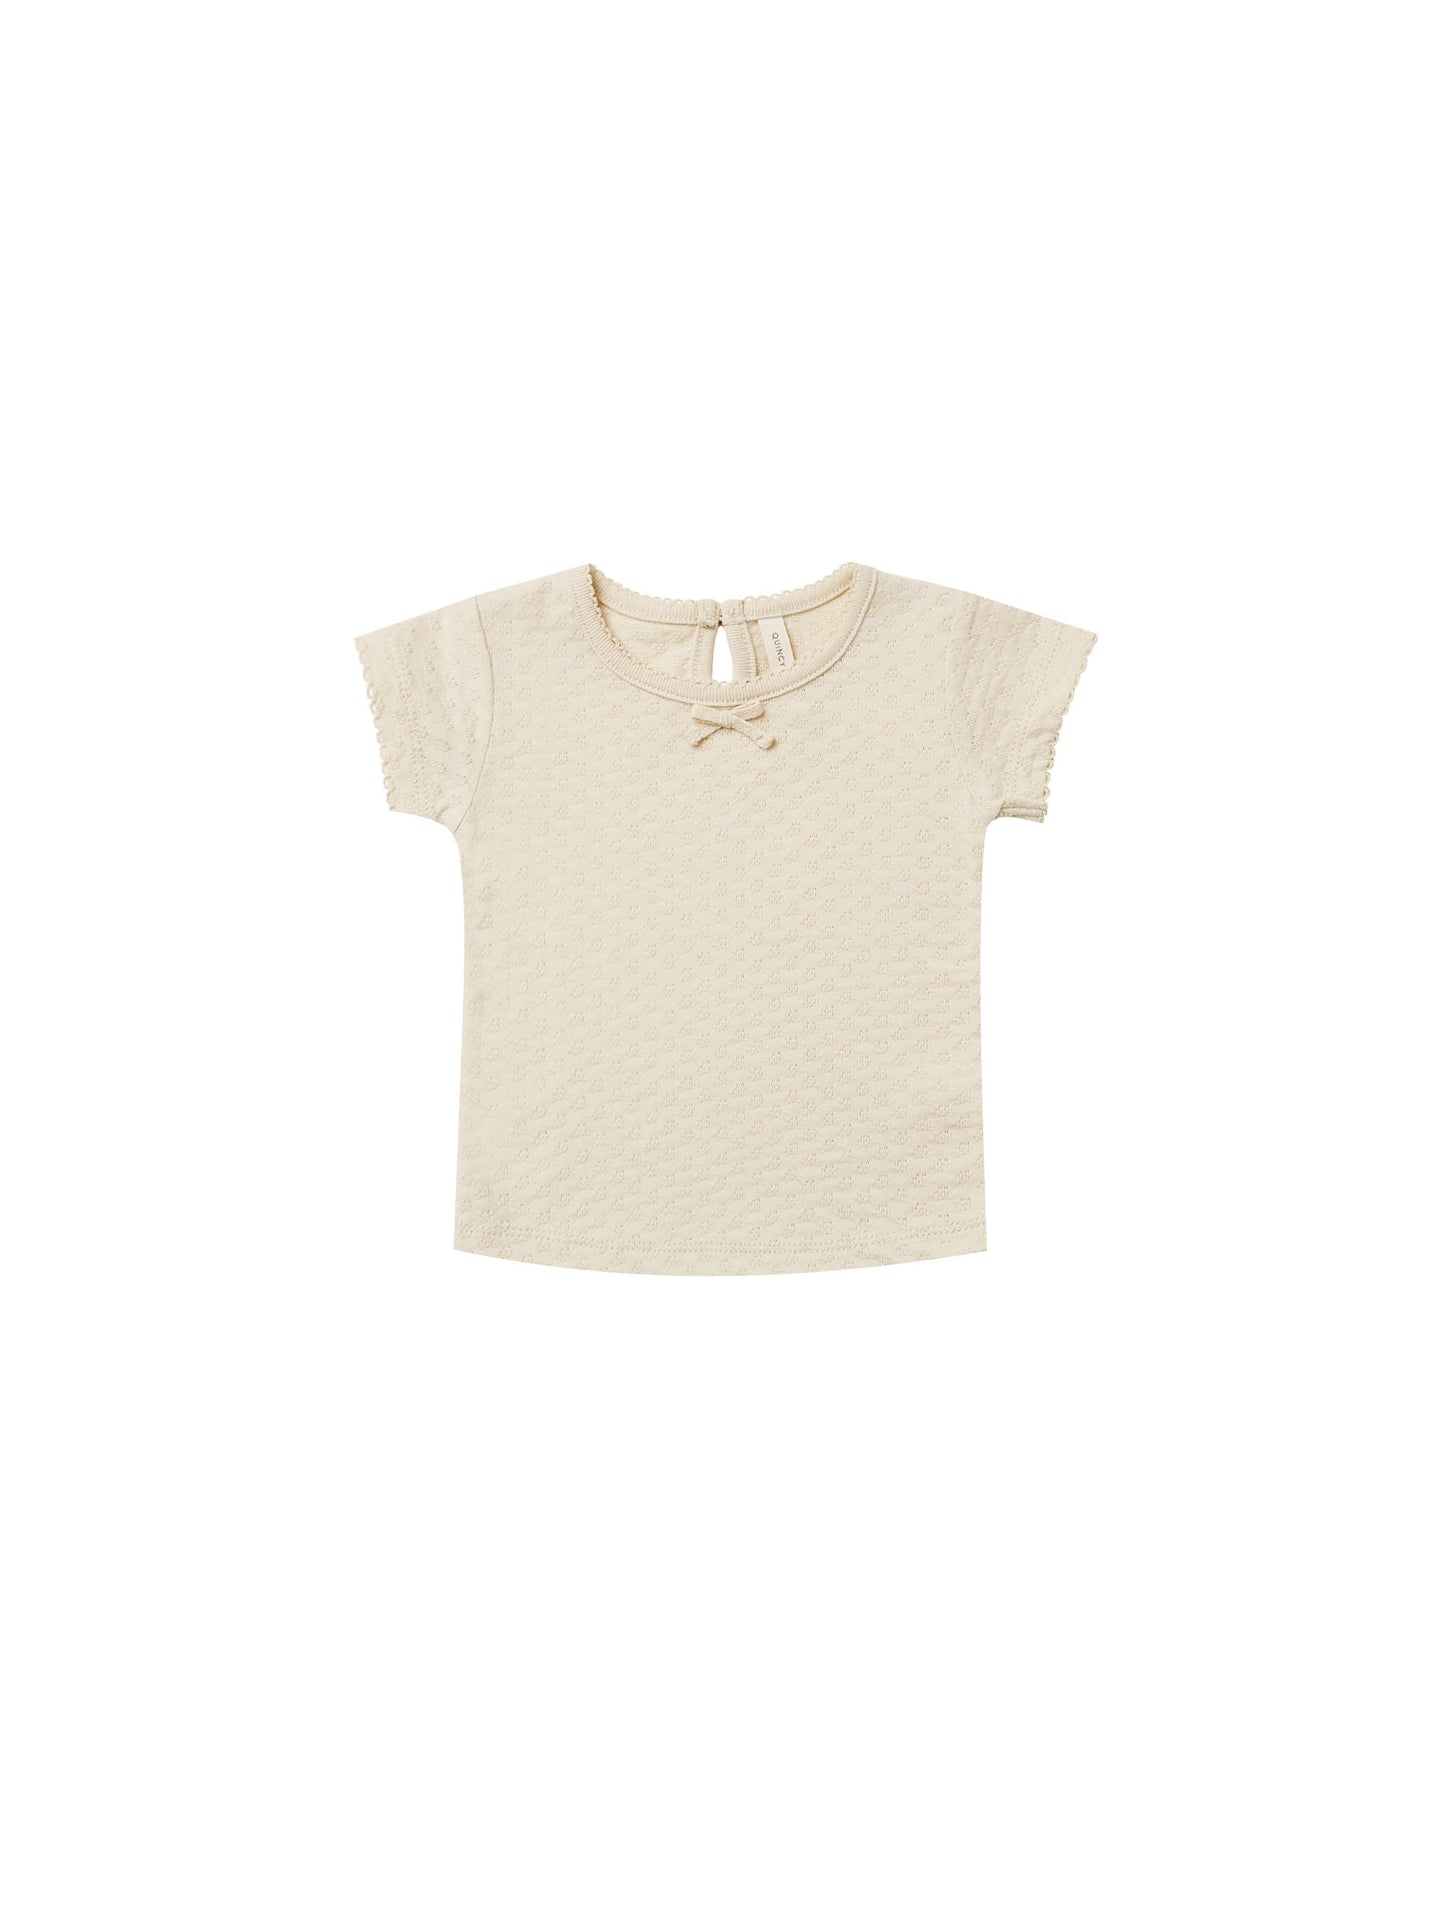 SALE - Quincy Mae Pointelle Tee - Multiple Colors Available